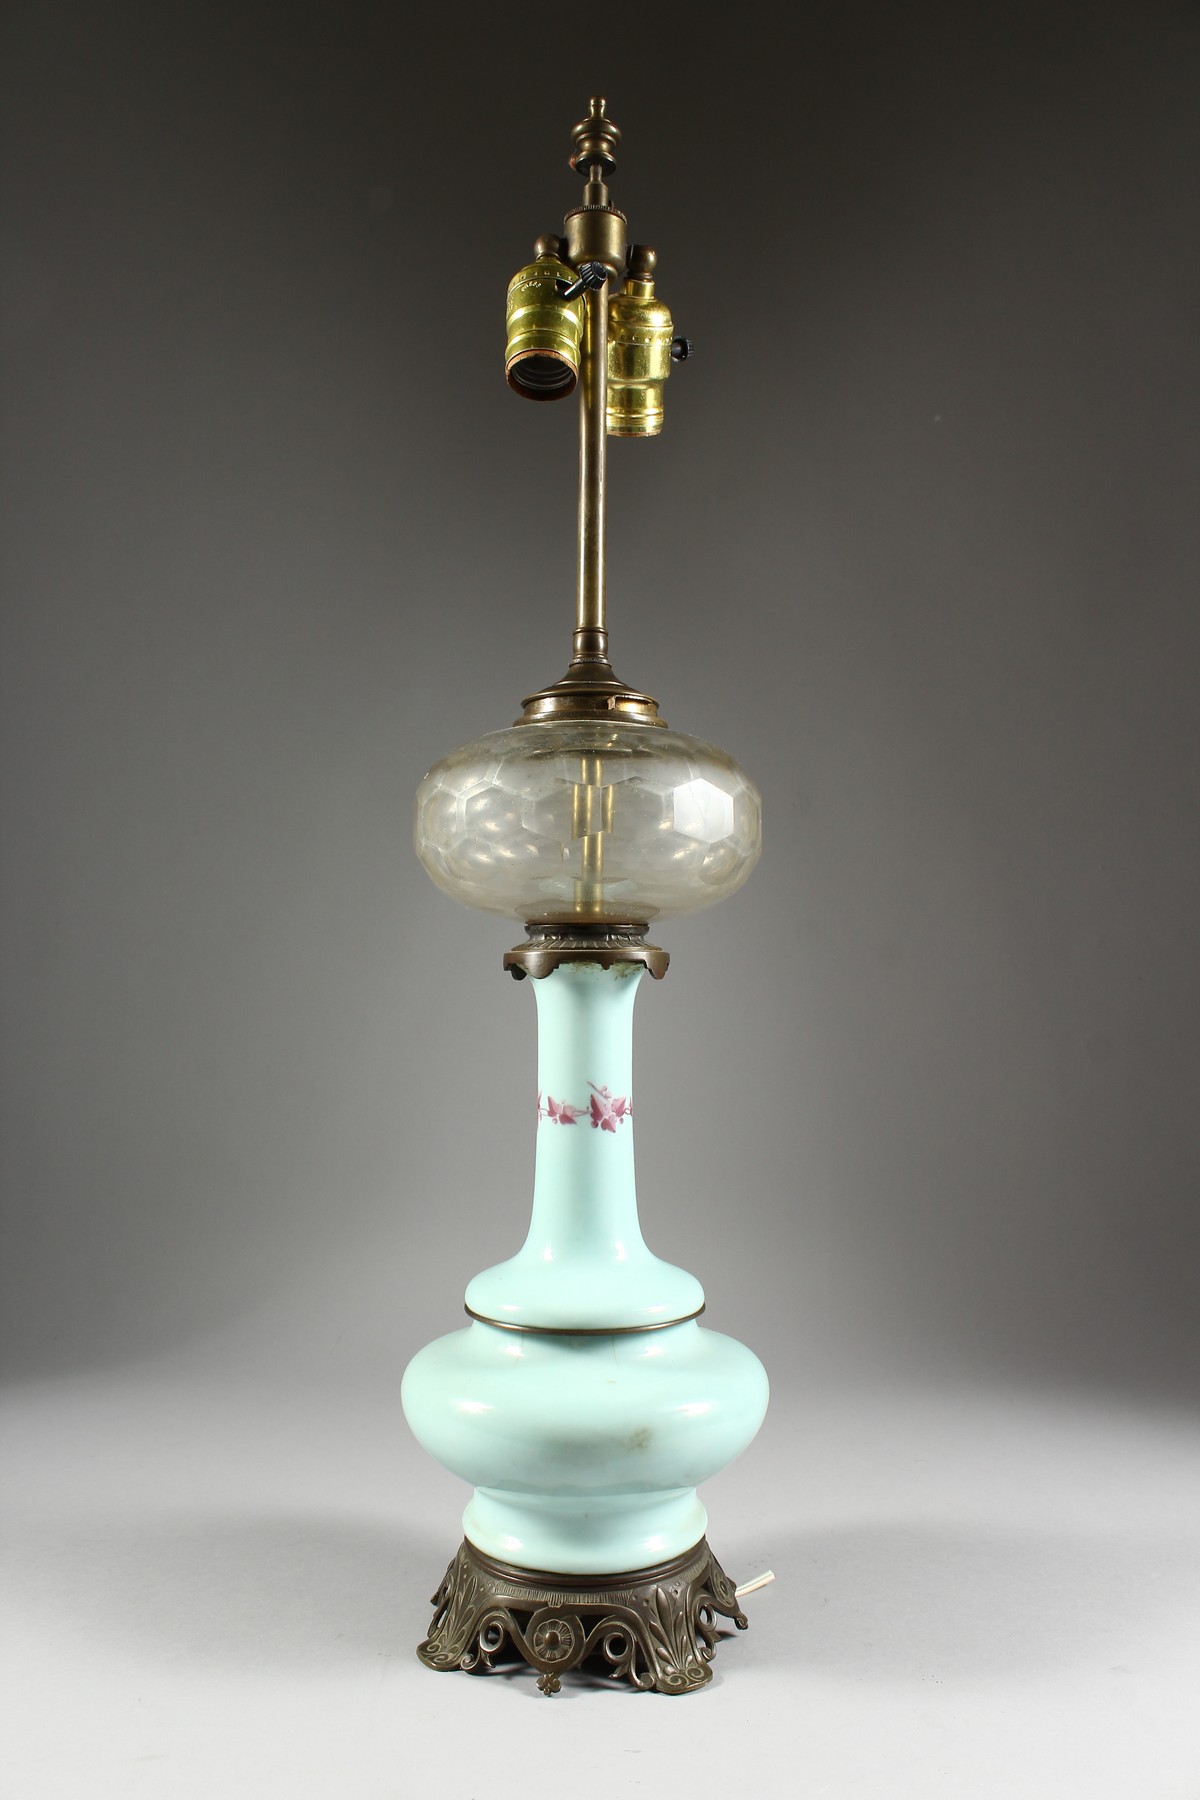 A VICTORIAN OPALINE LAMP with glass reservoir and metal mounts. 26ins high overall. - Image 4 of 7